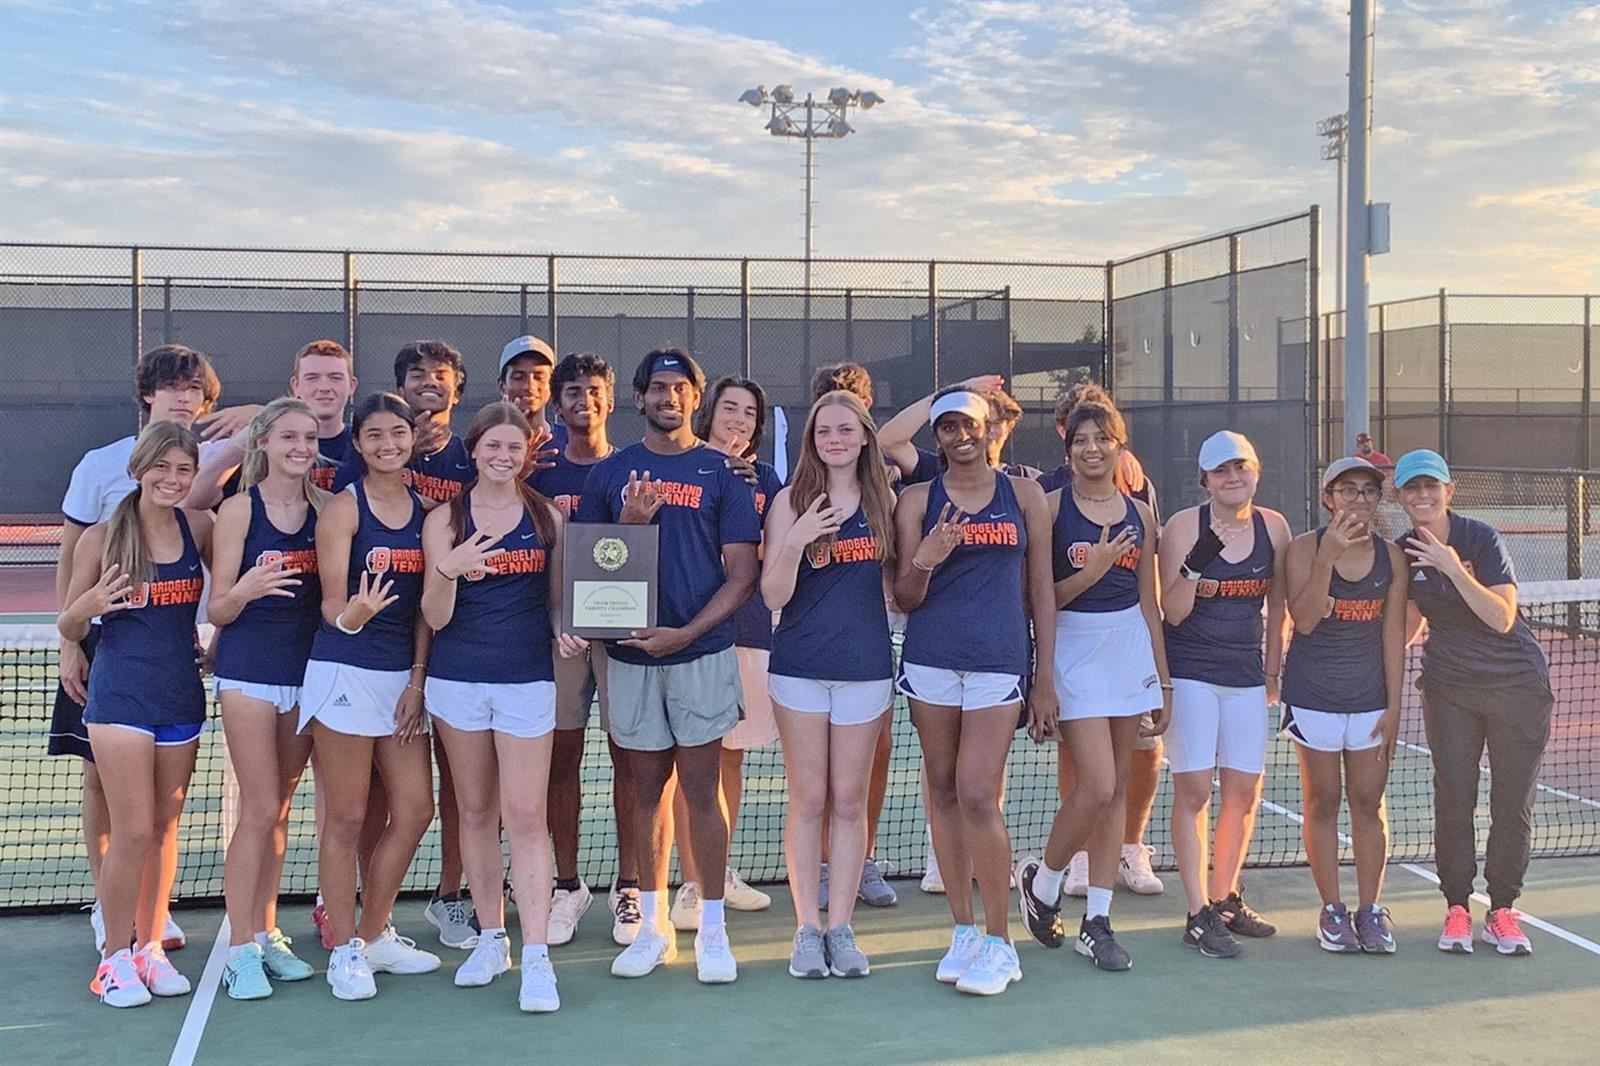 The Bridgeland High School tennis team won the outright district championship for the fourth consecutive year.